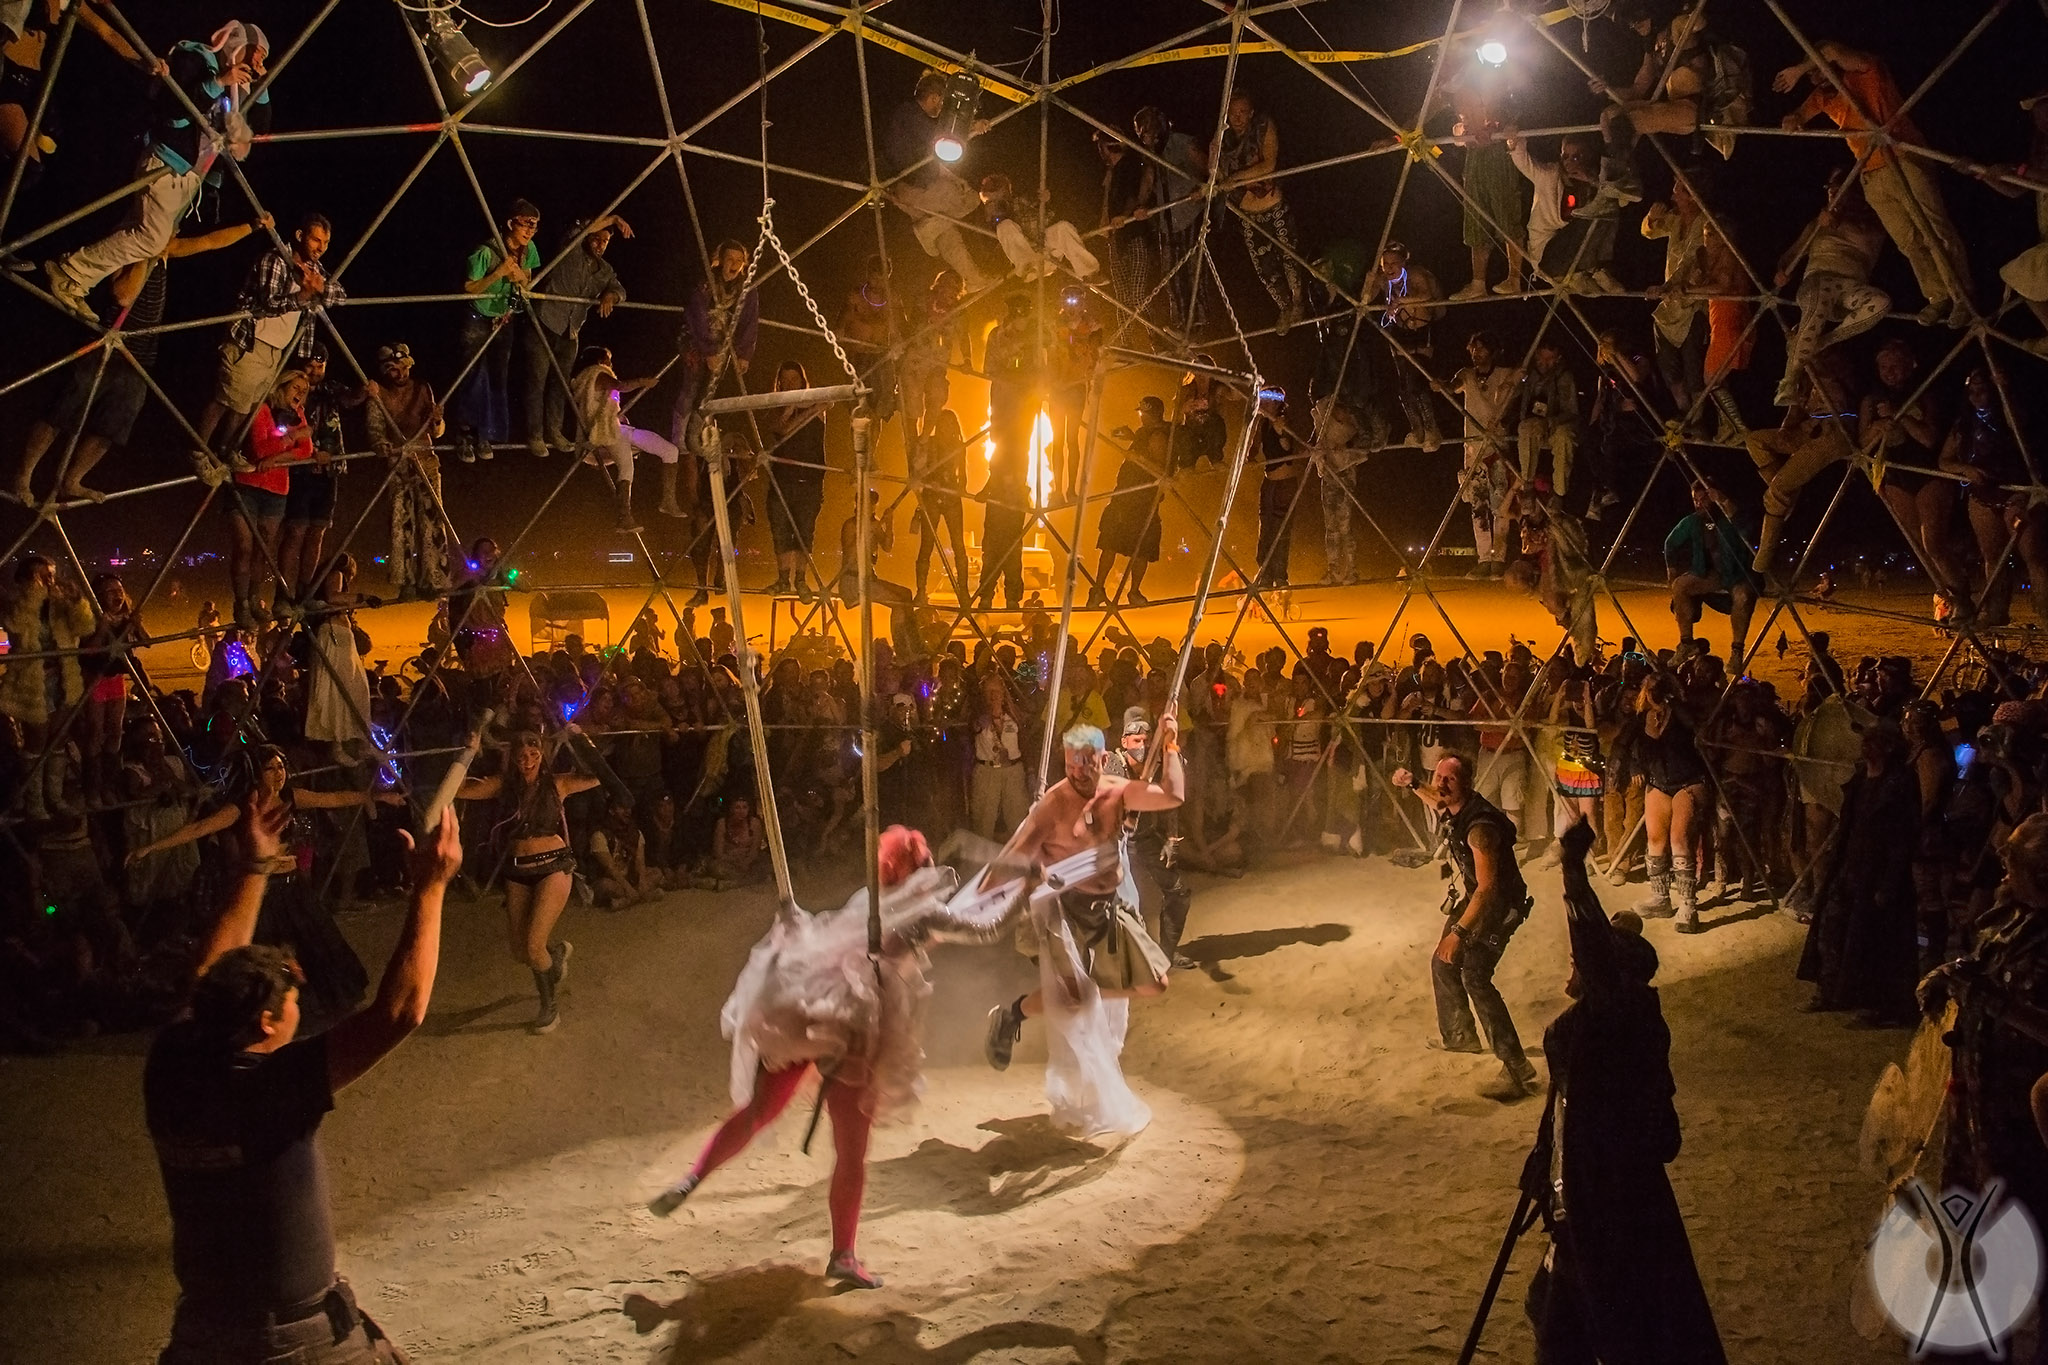 The Art of War (at Burning Man) â€” Part 2 â€” What is it Good ...